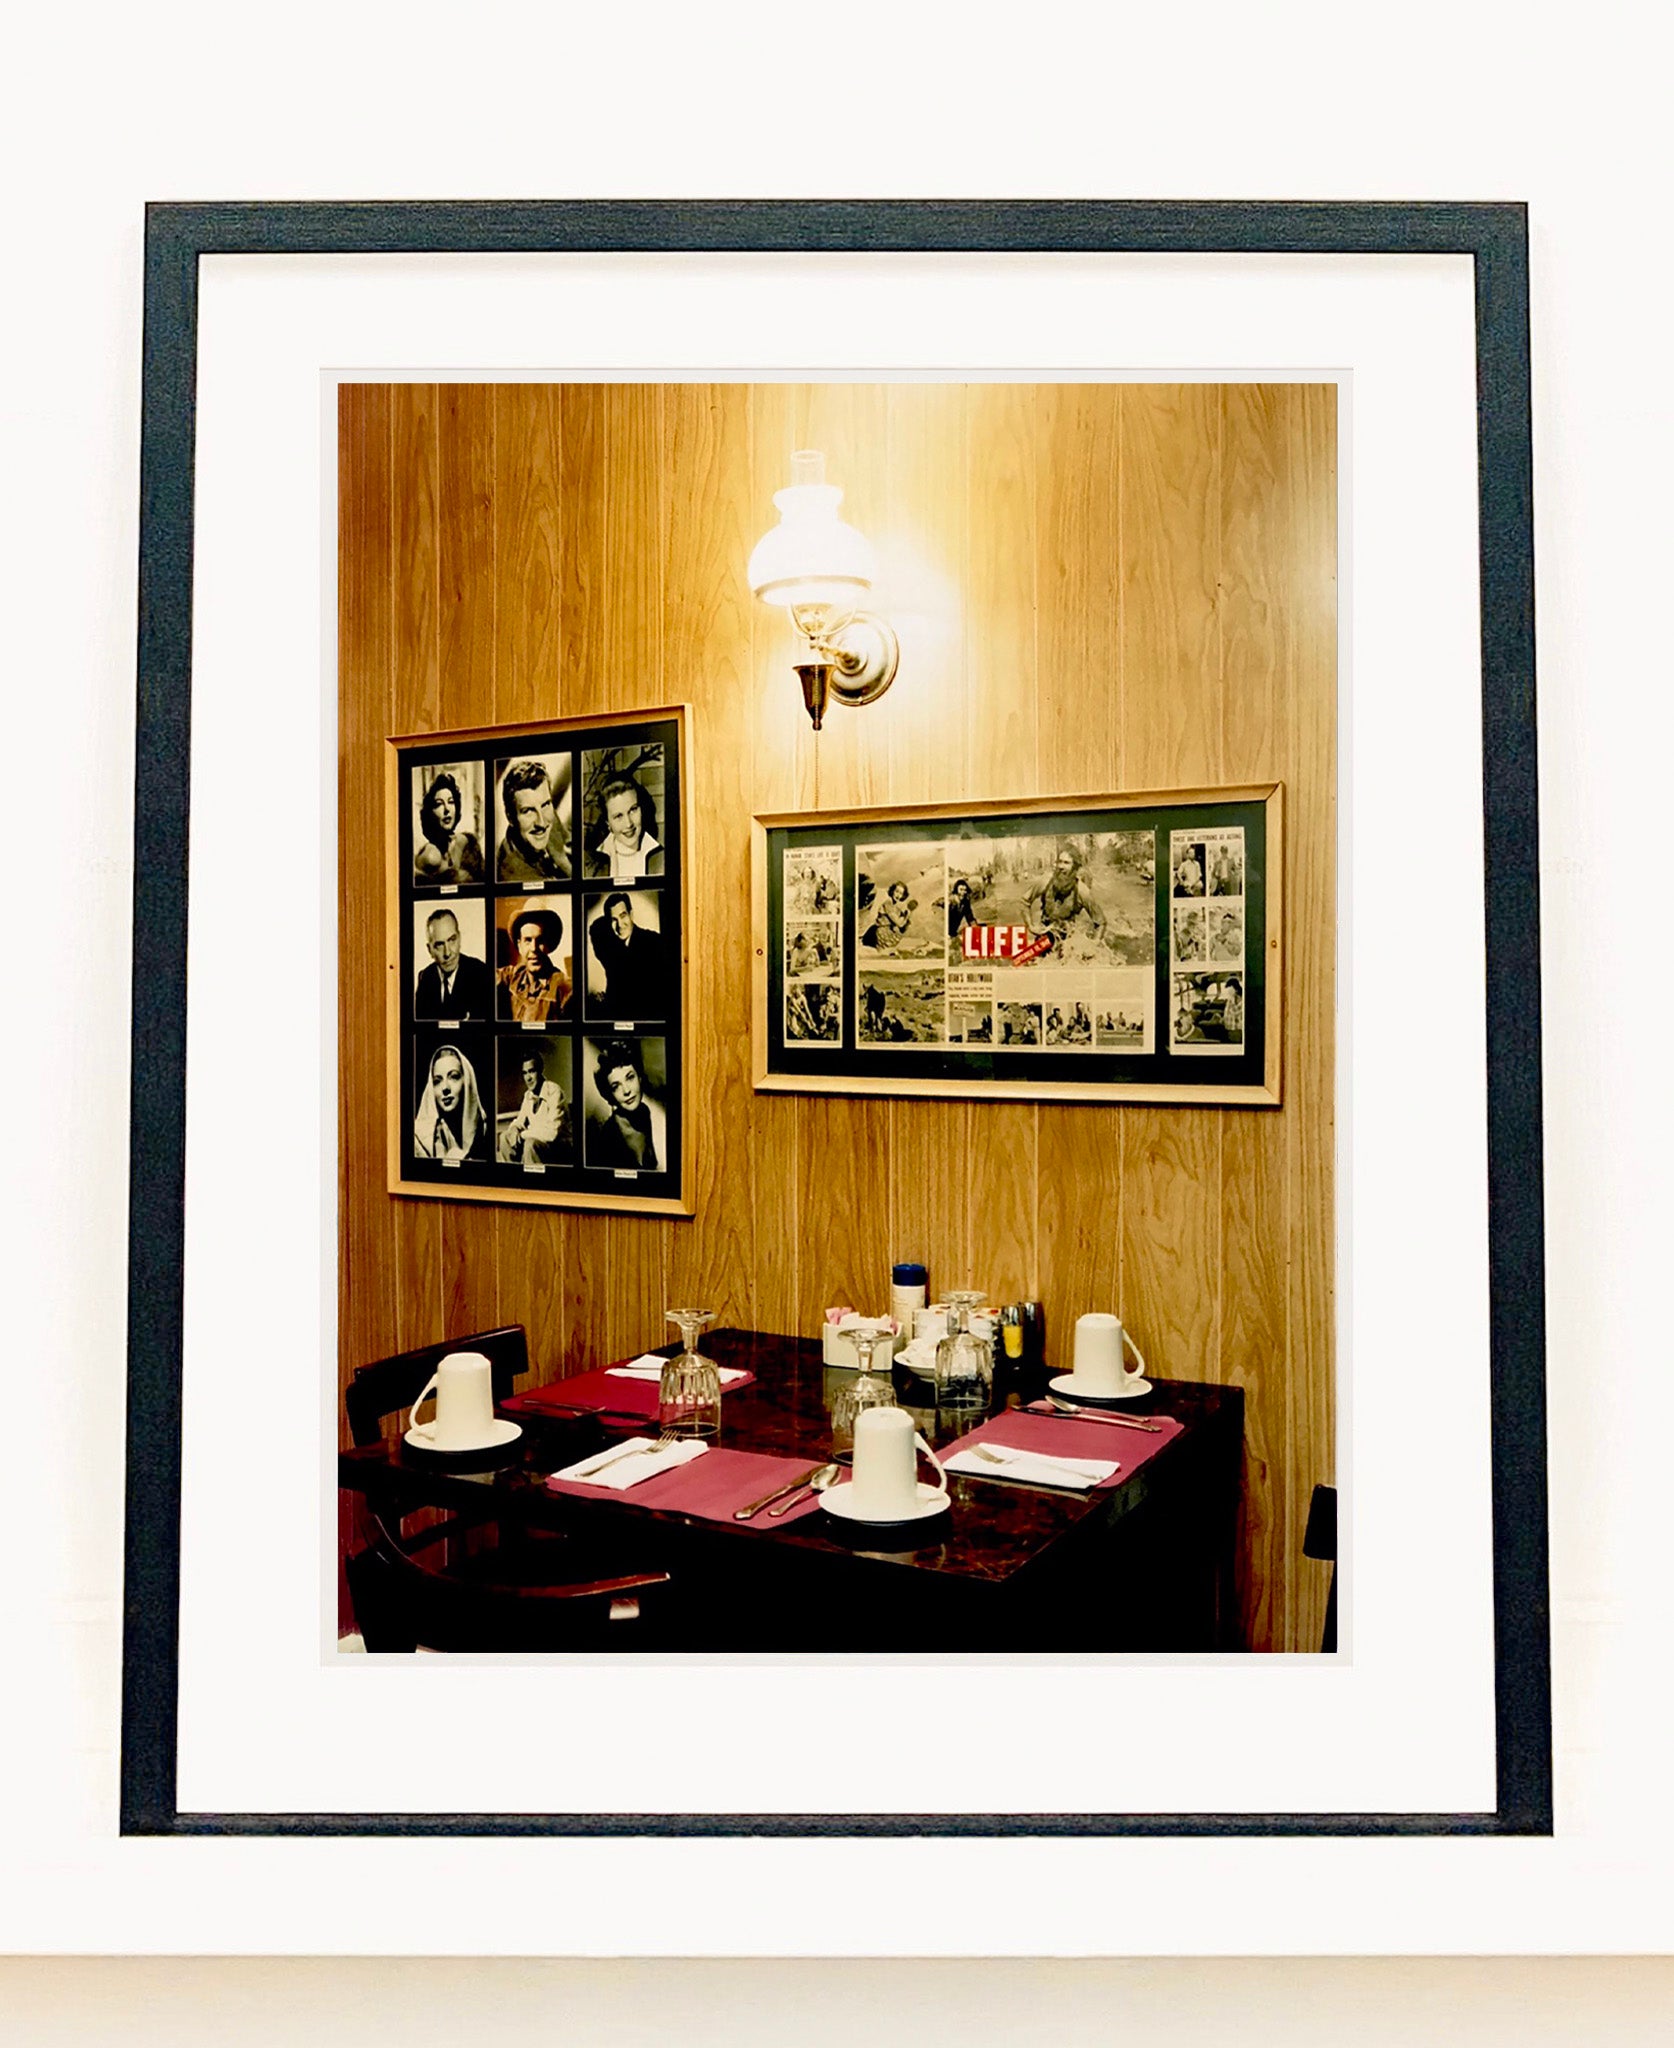 Photographed inside the iconic Parry Lodge that once hosted movie stars of the Western films made in the area, now the walls adorn their faces in cutouts from Life Magazine. The vintage interior and wood panelled walls create a mid-century cinematic scene. Part of Richard Heeps' Dream in Colour series.